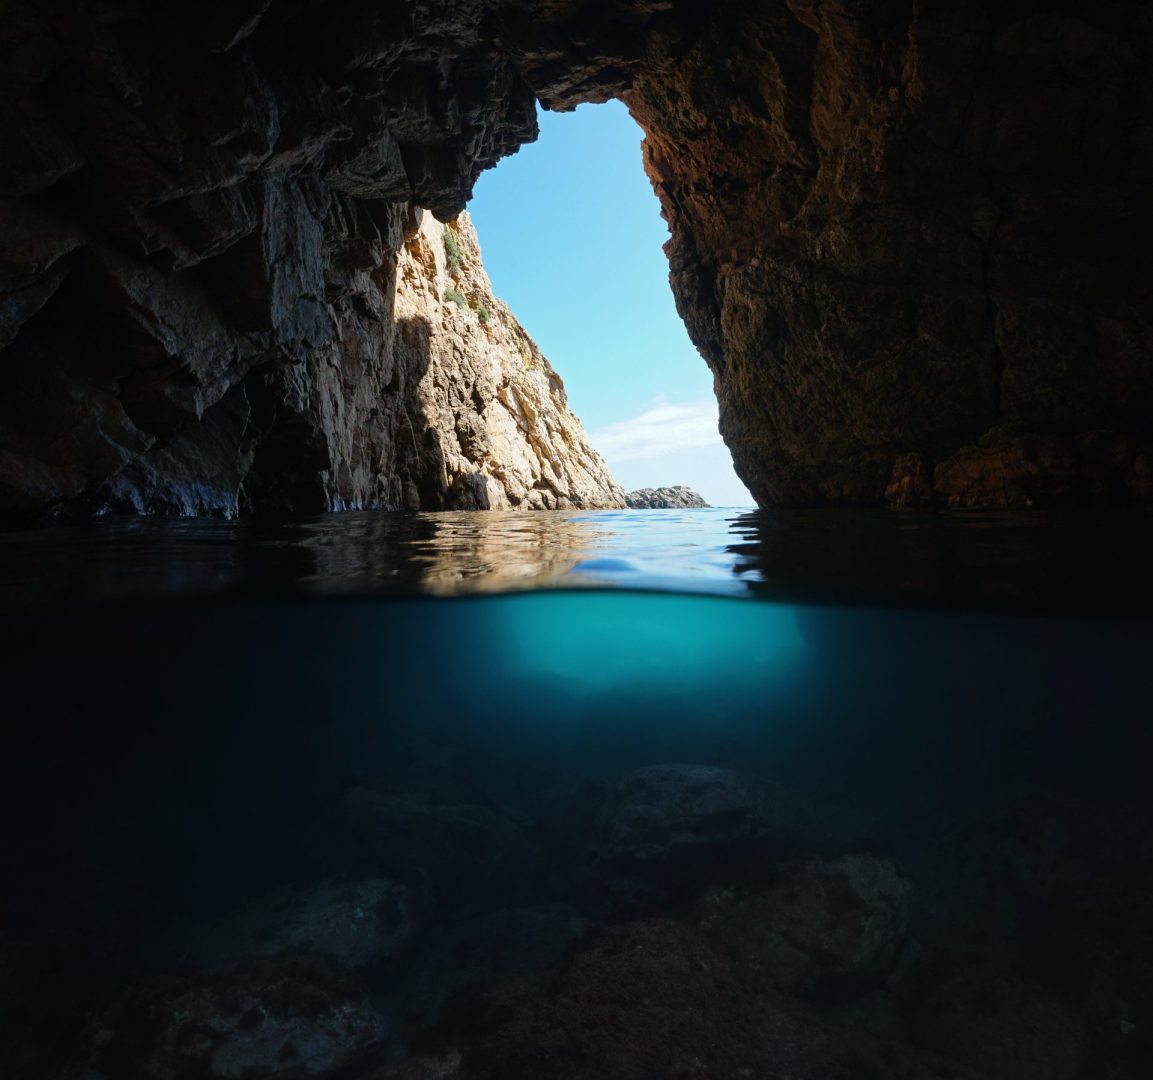 Under a rocky natural arch on the shore of the Mediterranean sea, split view over and underwater, Spain, Costa Brava, Catalonia, Palamos, Cala Foradada